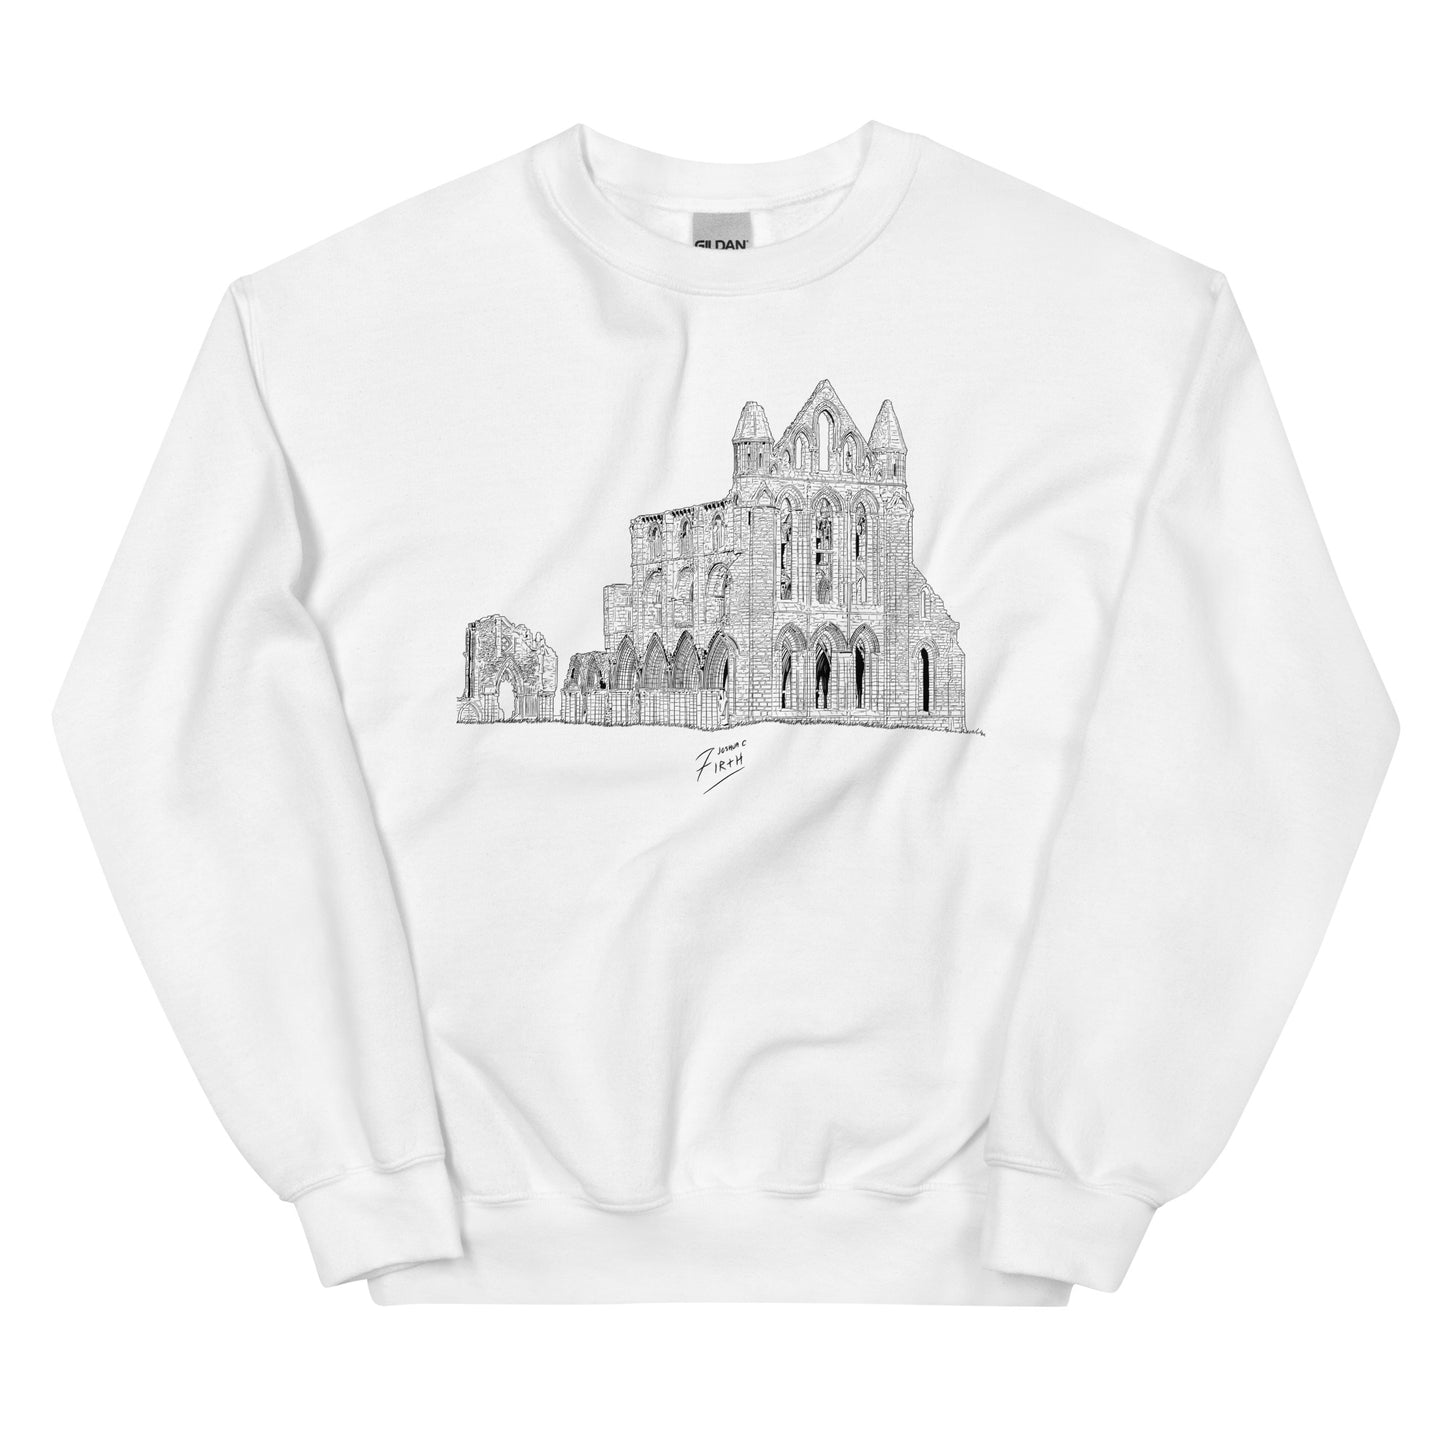 Whitby Abbey, North Yorkshire themed sweatshirt jumper. White colour